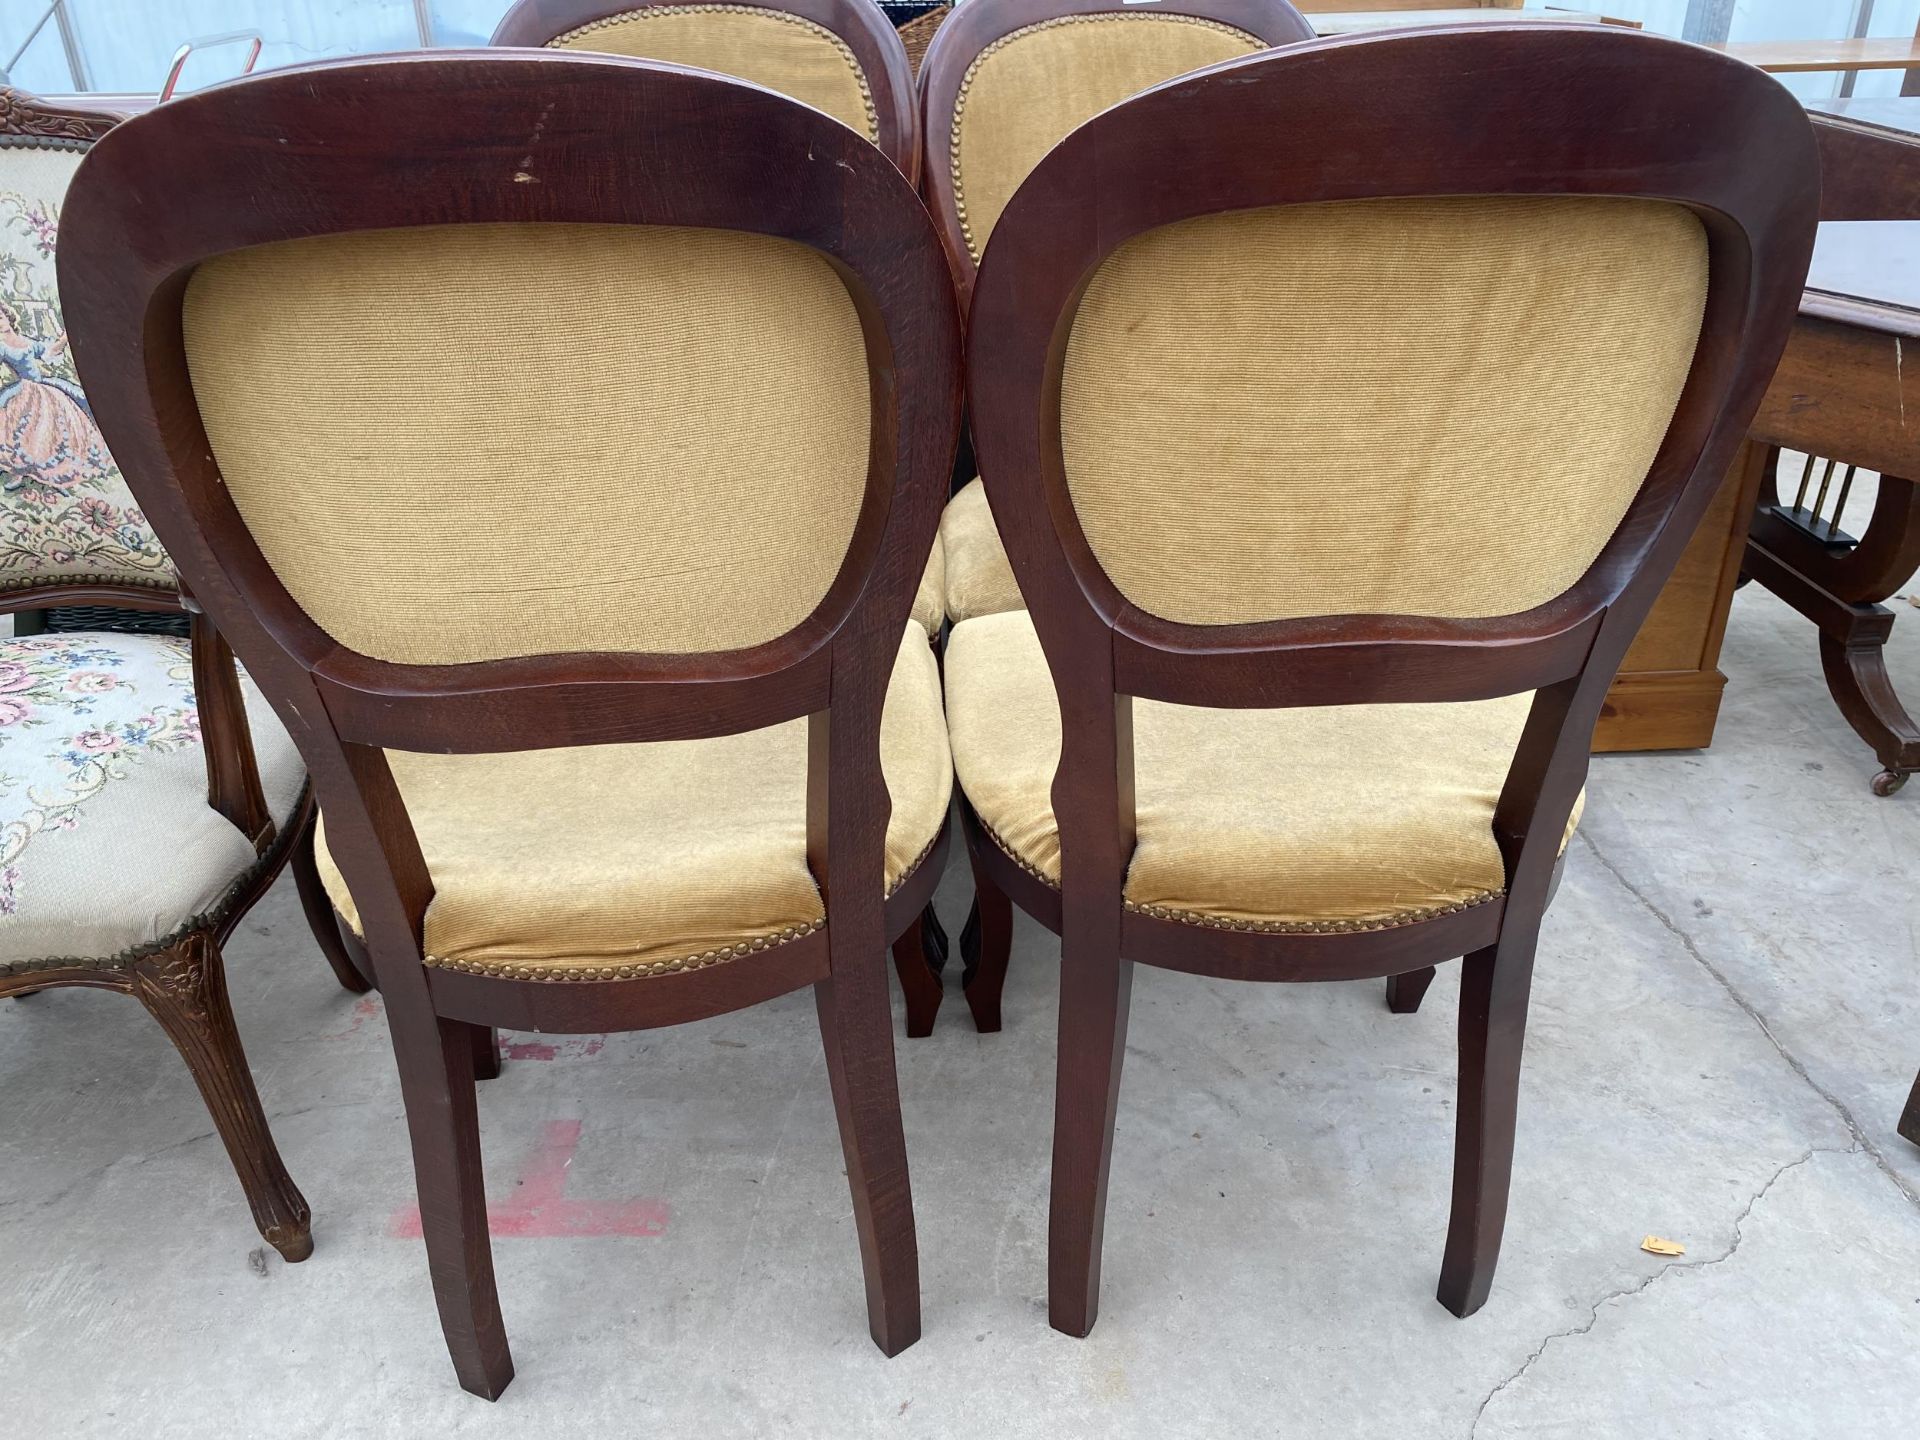 A SET OF FOUR VICTORIAN STYLE DINING CHAIRS - Image 3 of 3